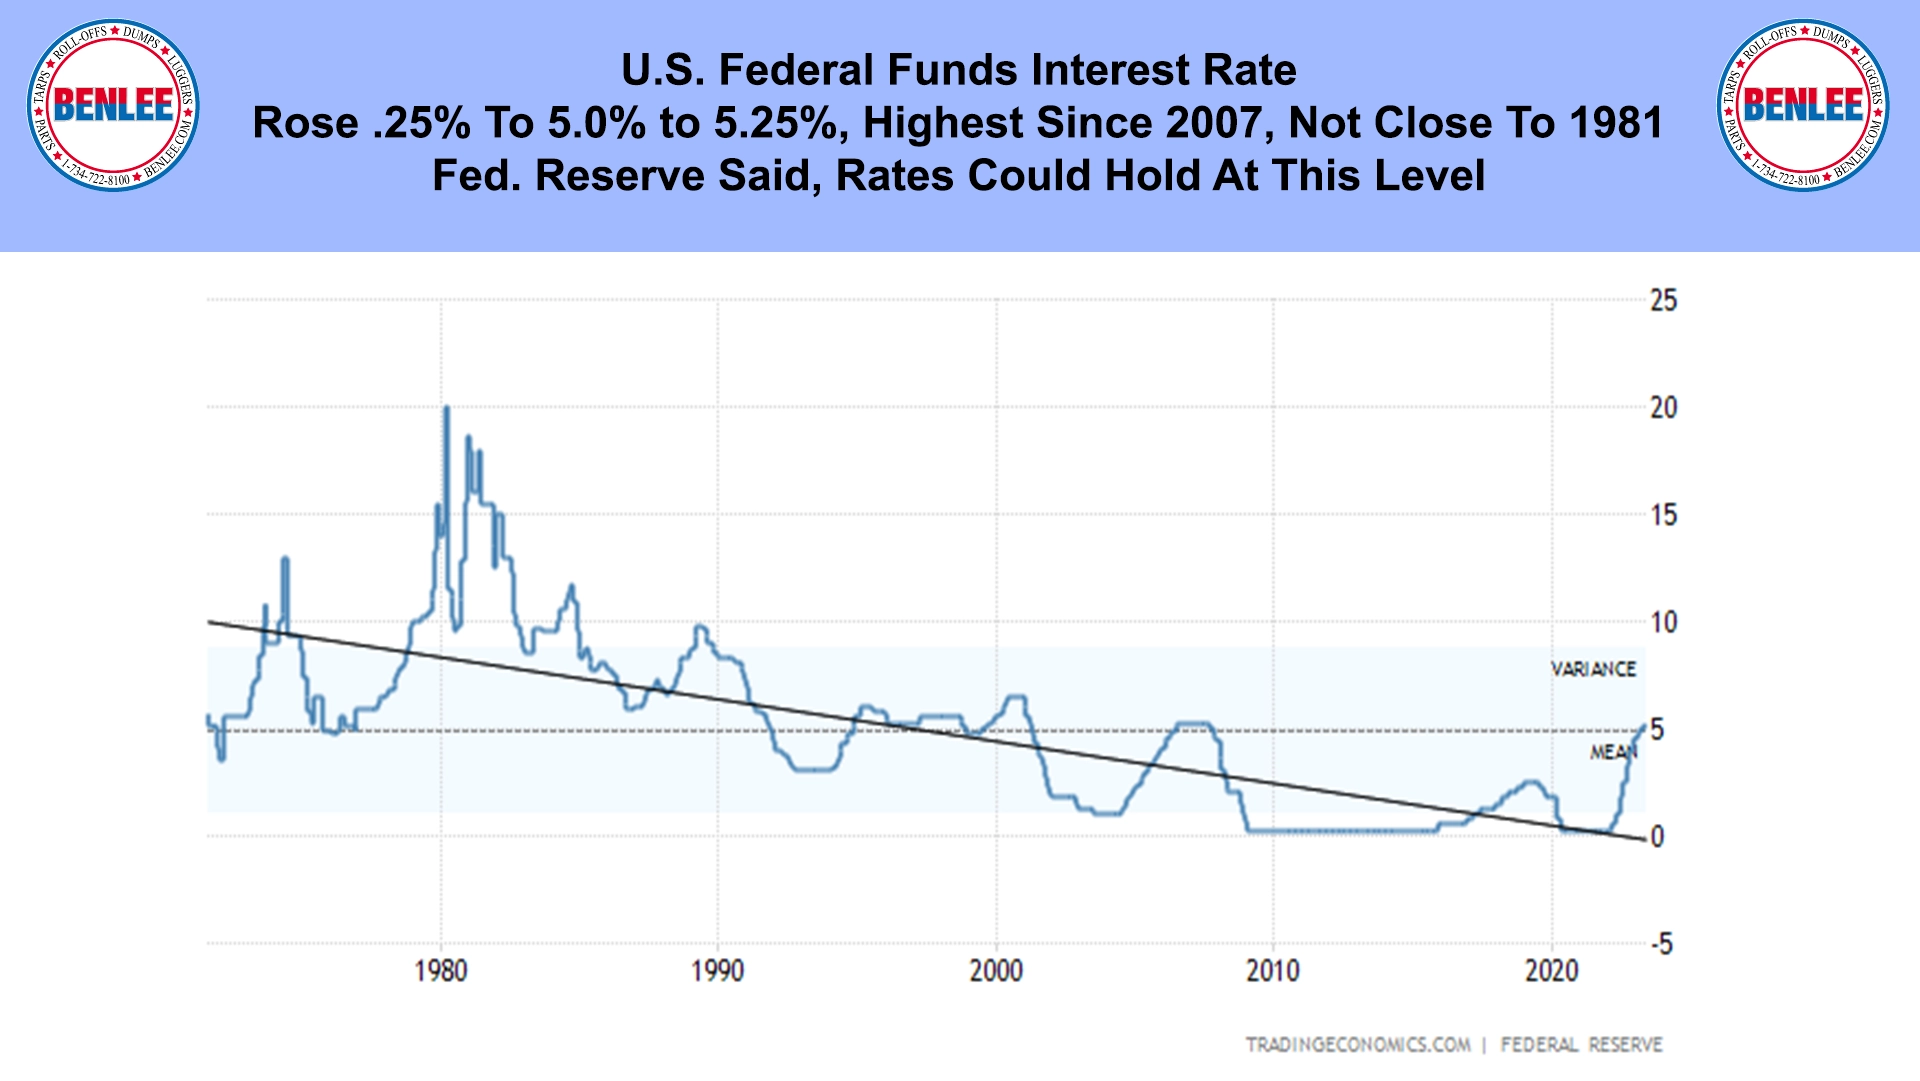 U.S. Federal Funds Interest Rate